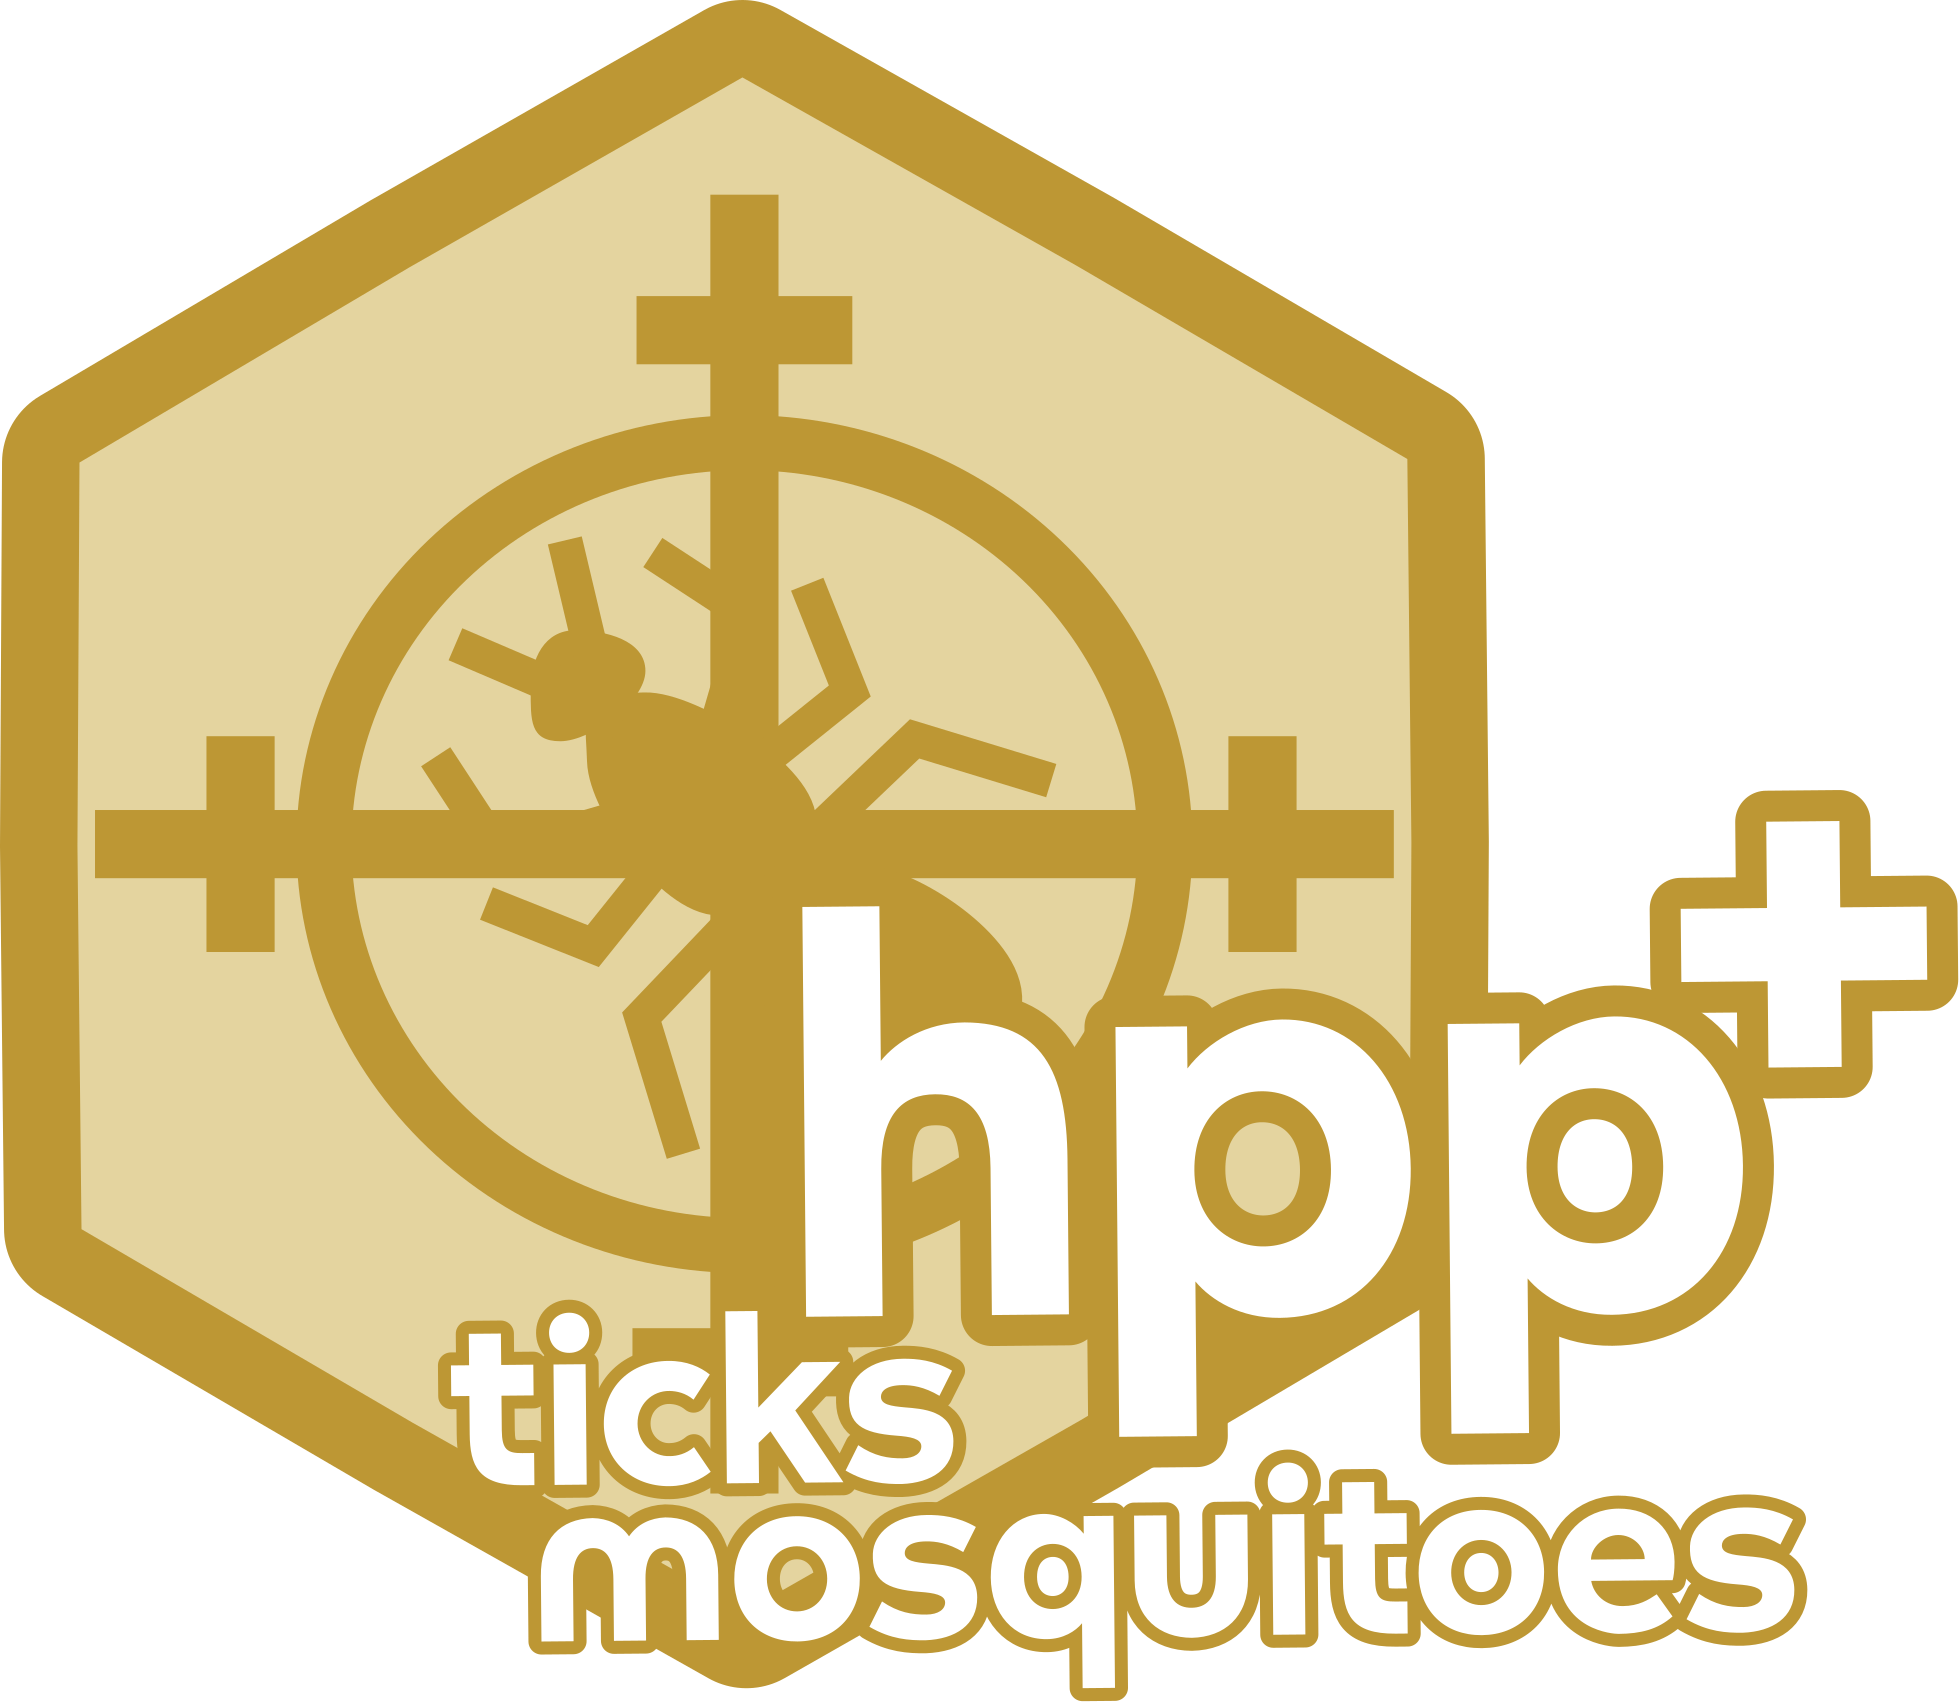 Home Protection Plan Plus Ticks and Mosquitoes